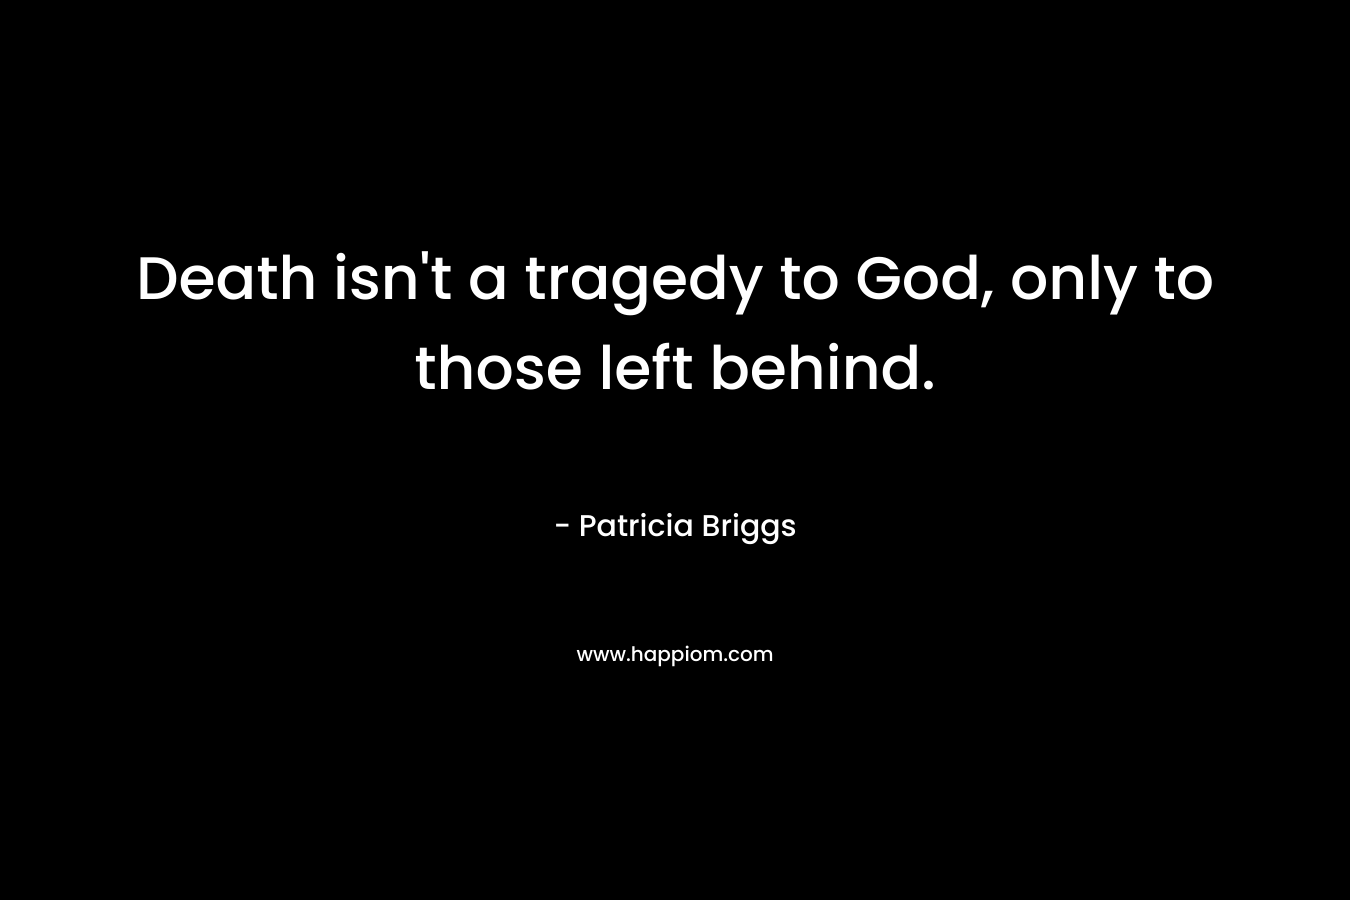 Death isn’t a tragedy to God, only to those left behind. – Patricia Briggs